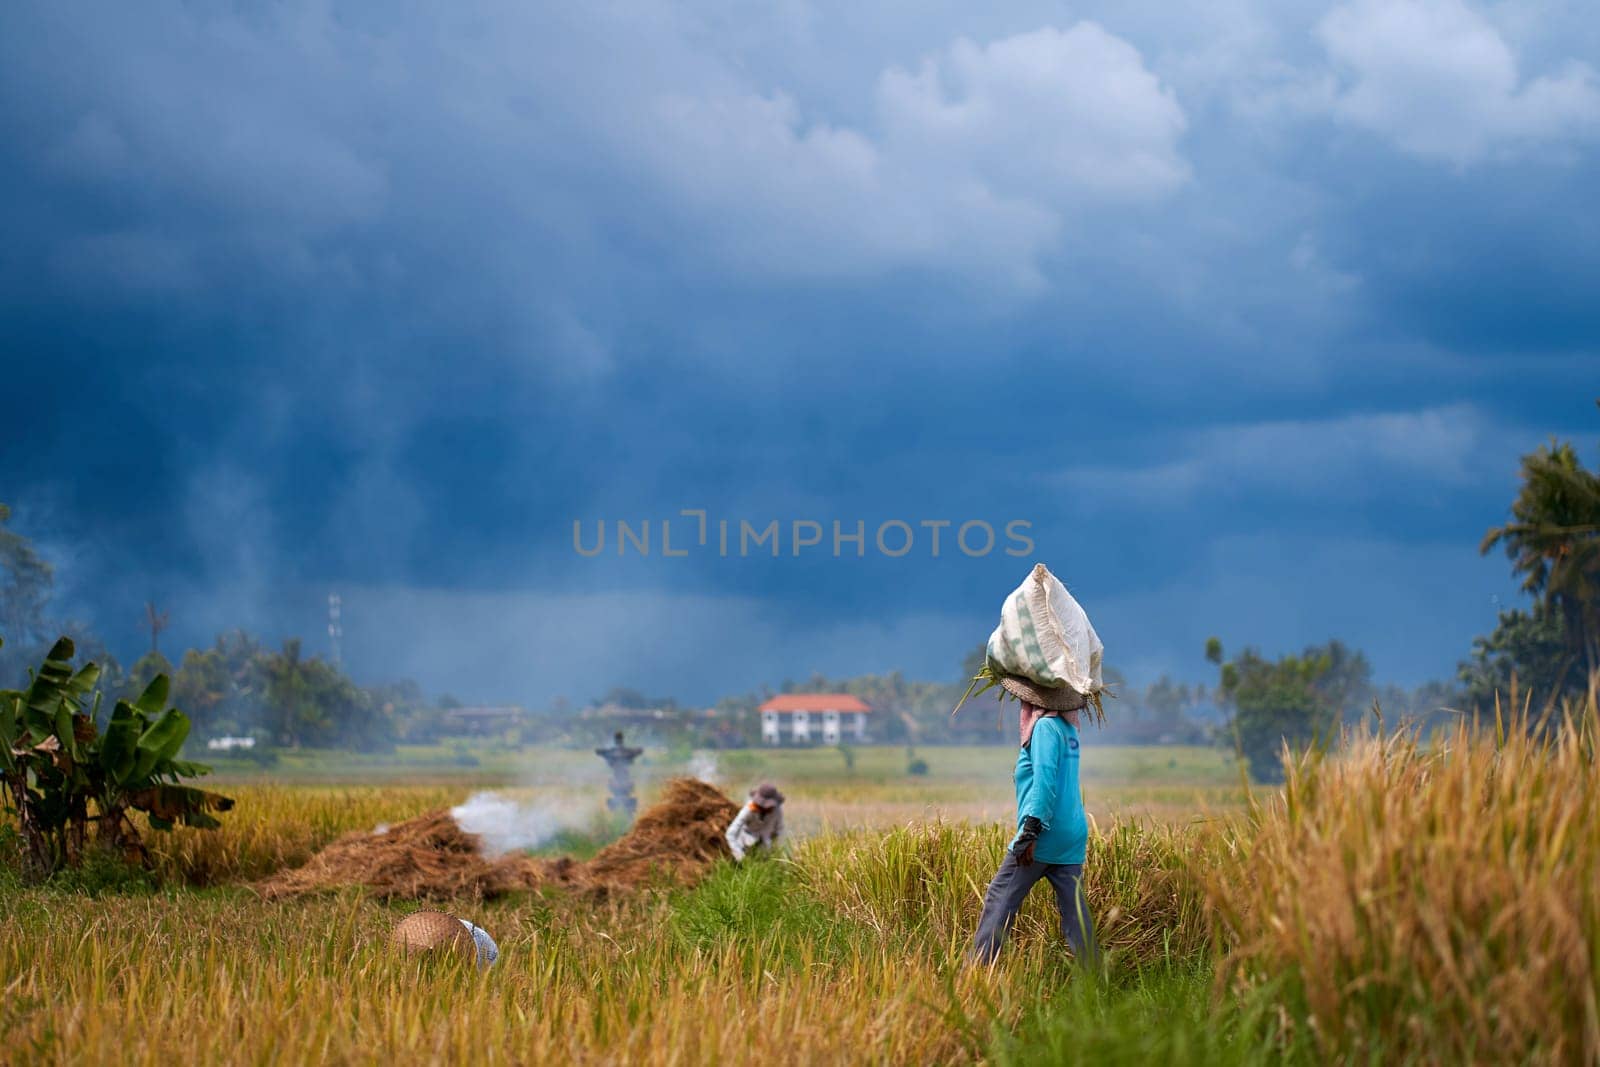 Harvest season in a rice field. An Asian farmer carries a bag of mowed rice on his head